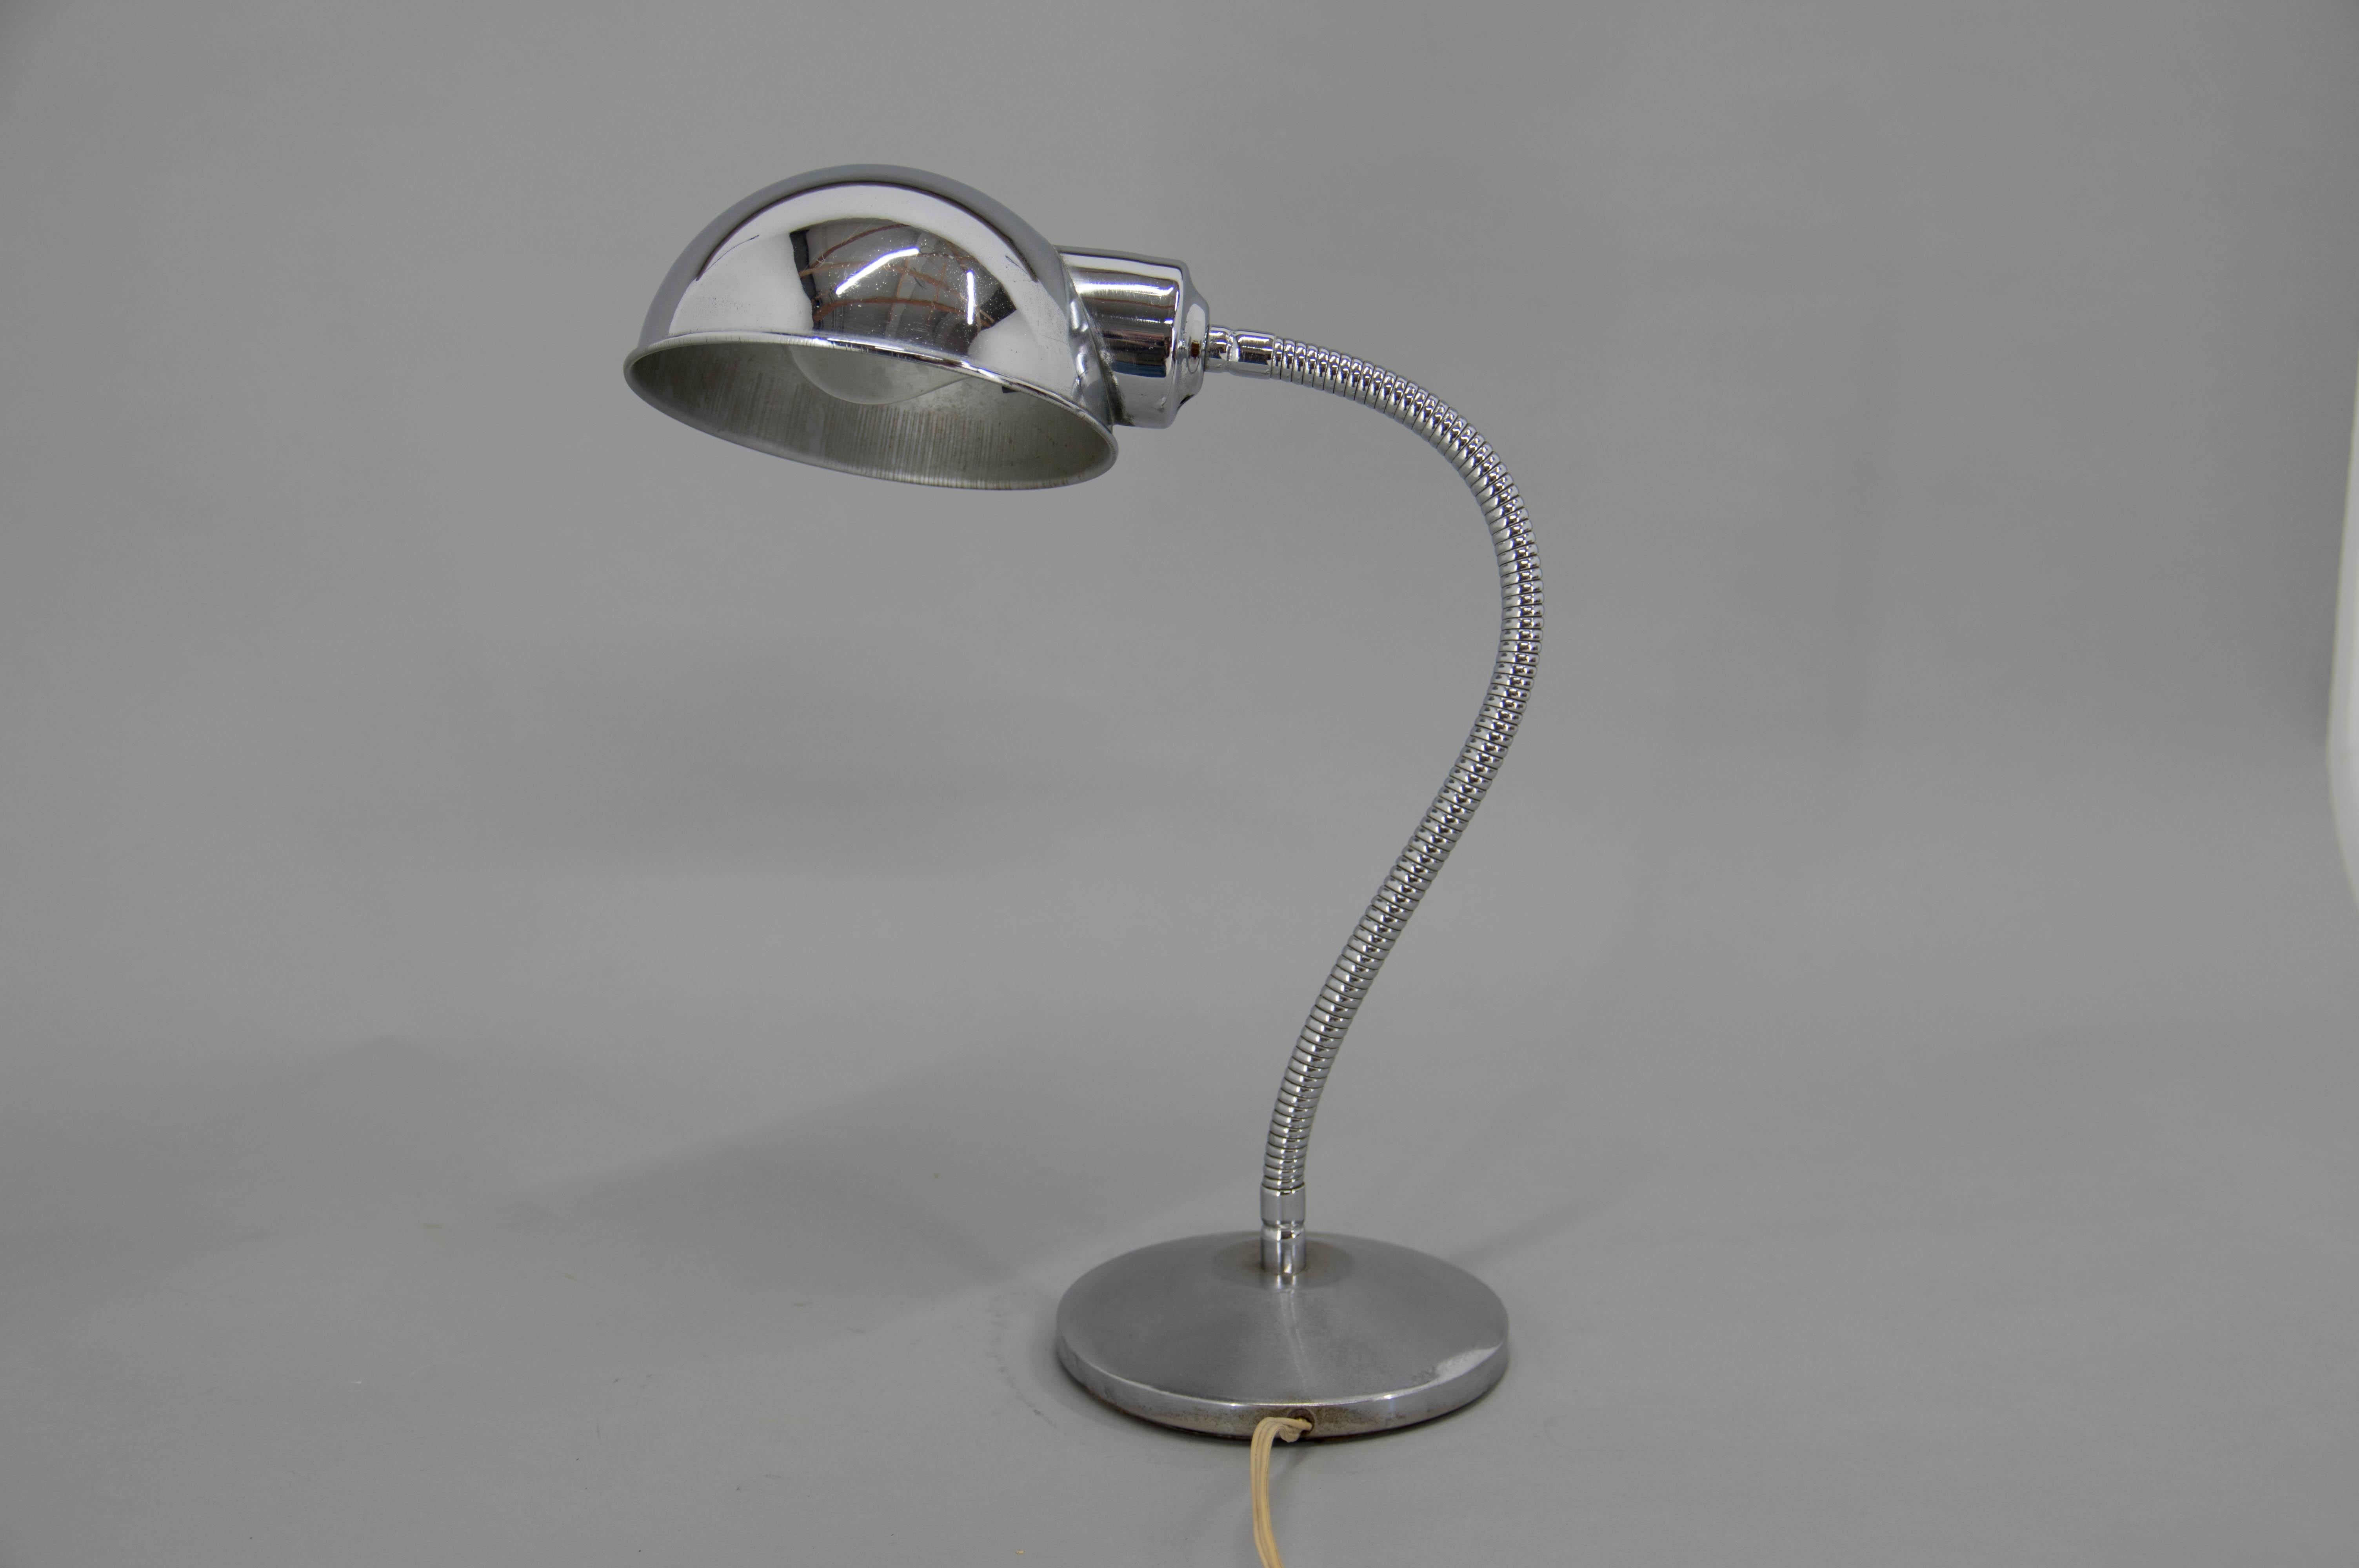 Table lamp with flexible shade made in 1940s.
Very good original condition.
1 x 40 W, E25-E27 bulb.
US plug adapter included.
 